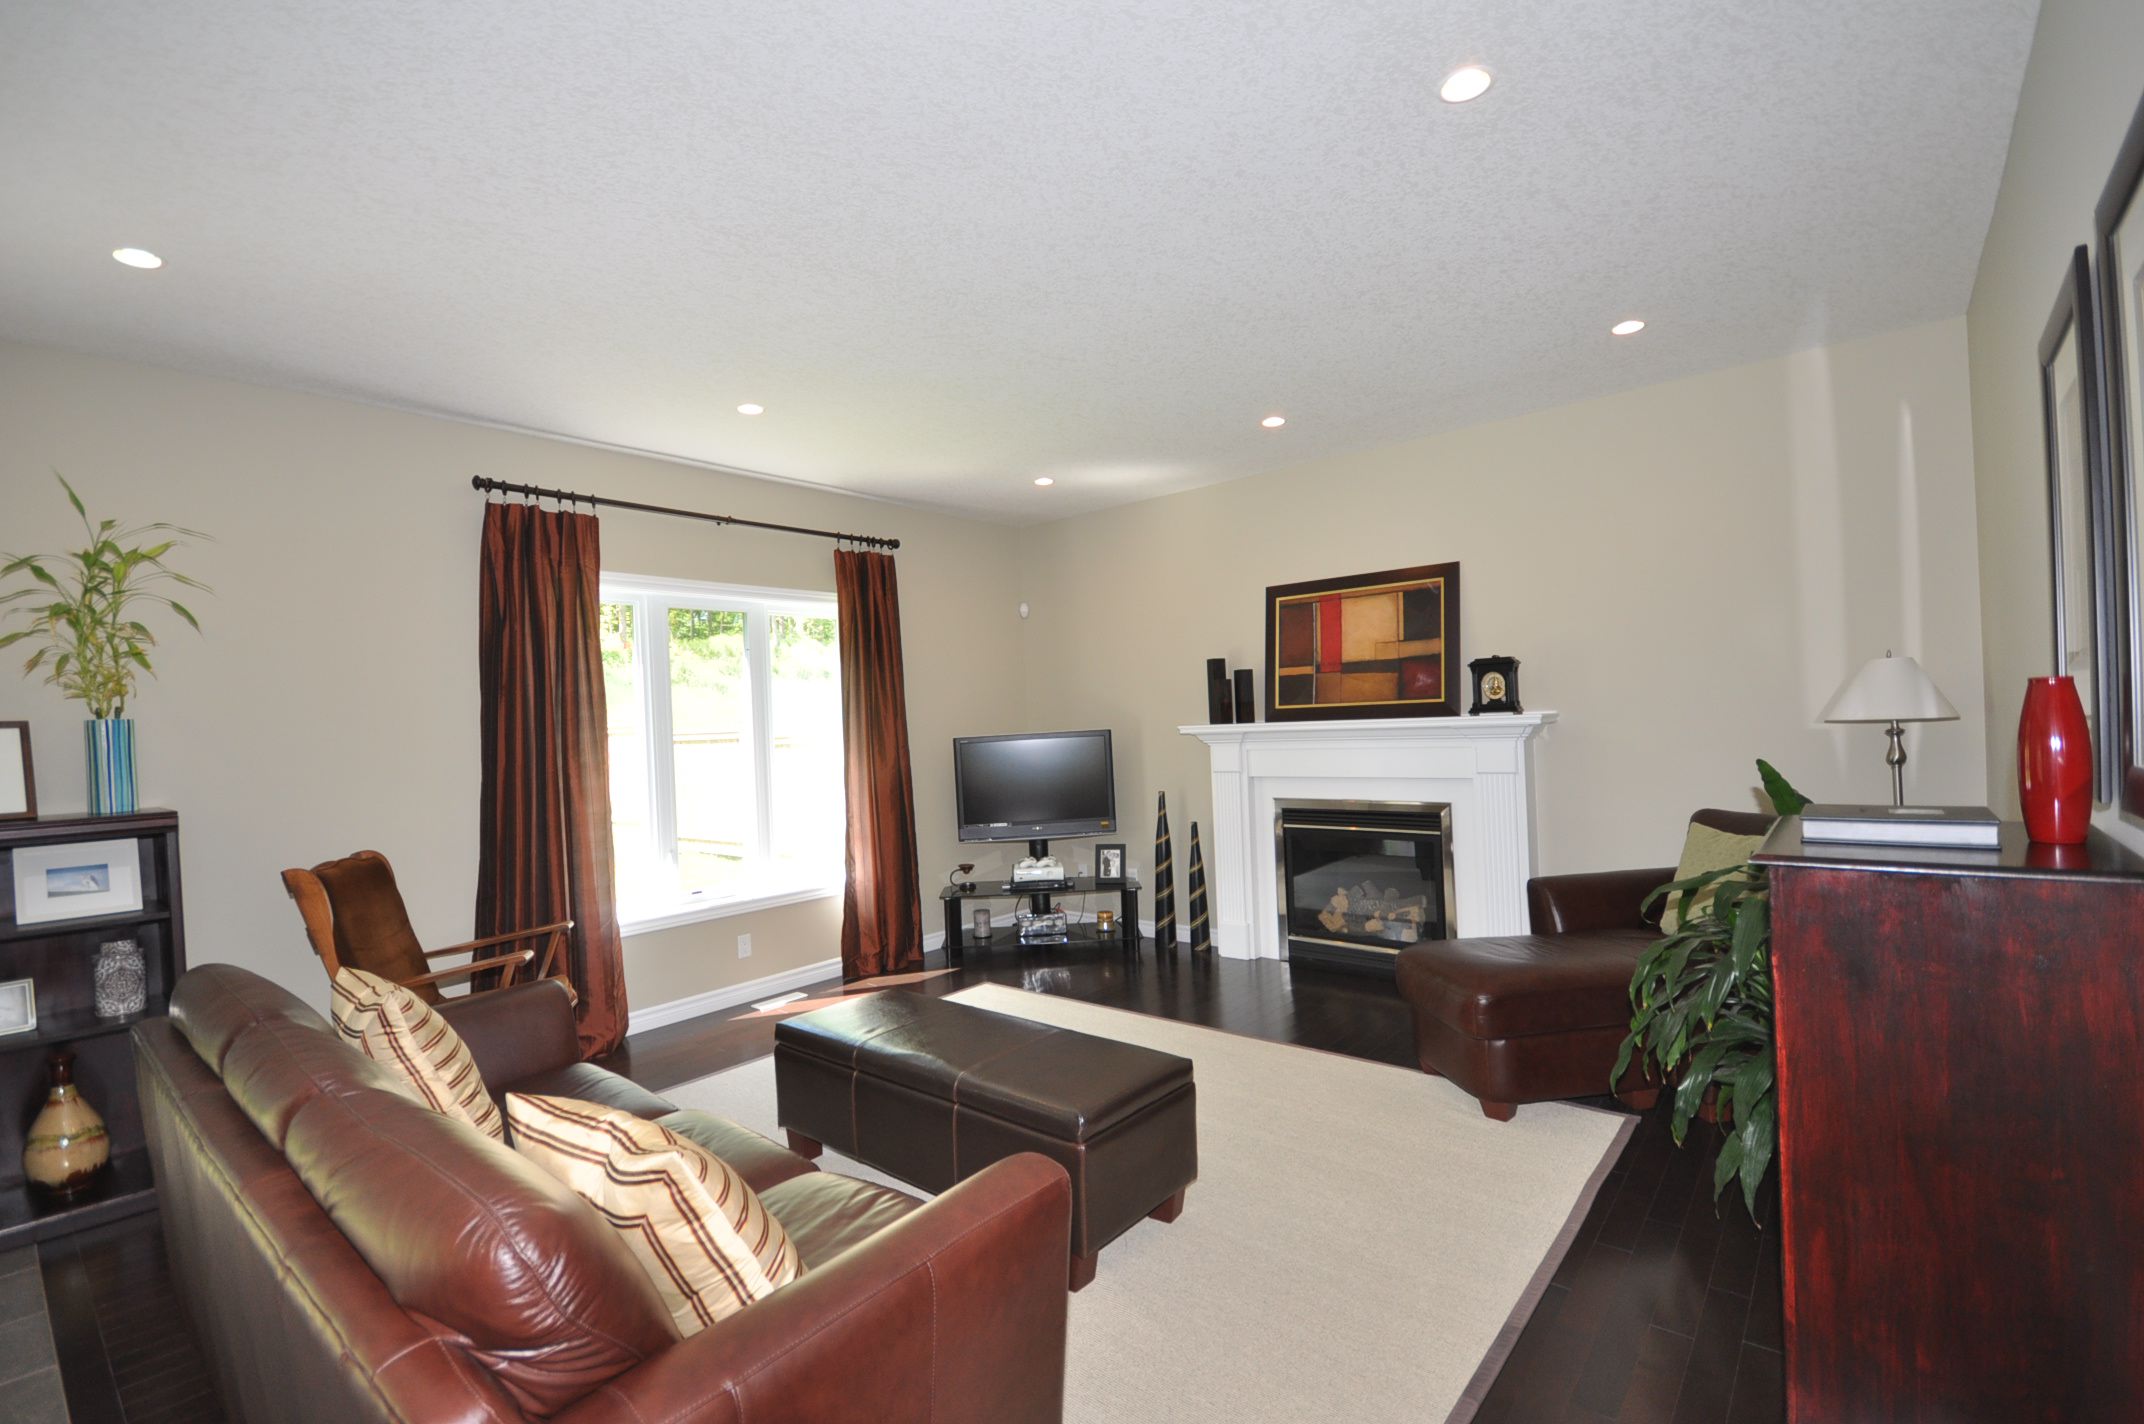 Great Room with large sunny window, cozy gas fireplace & hardwood floors